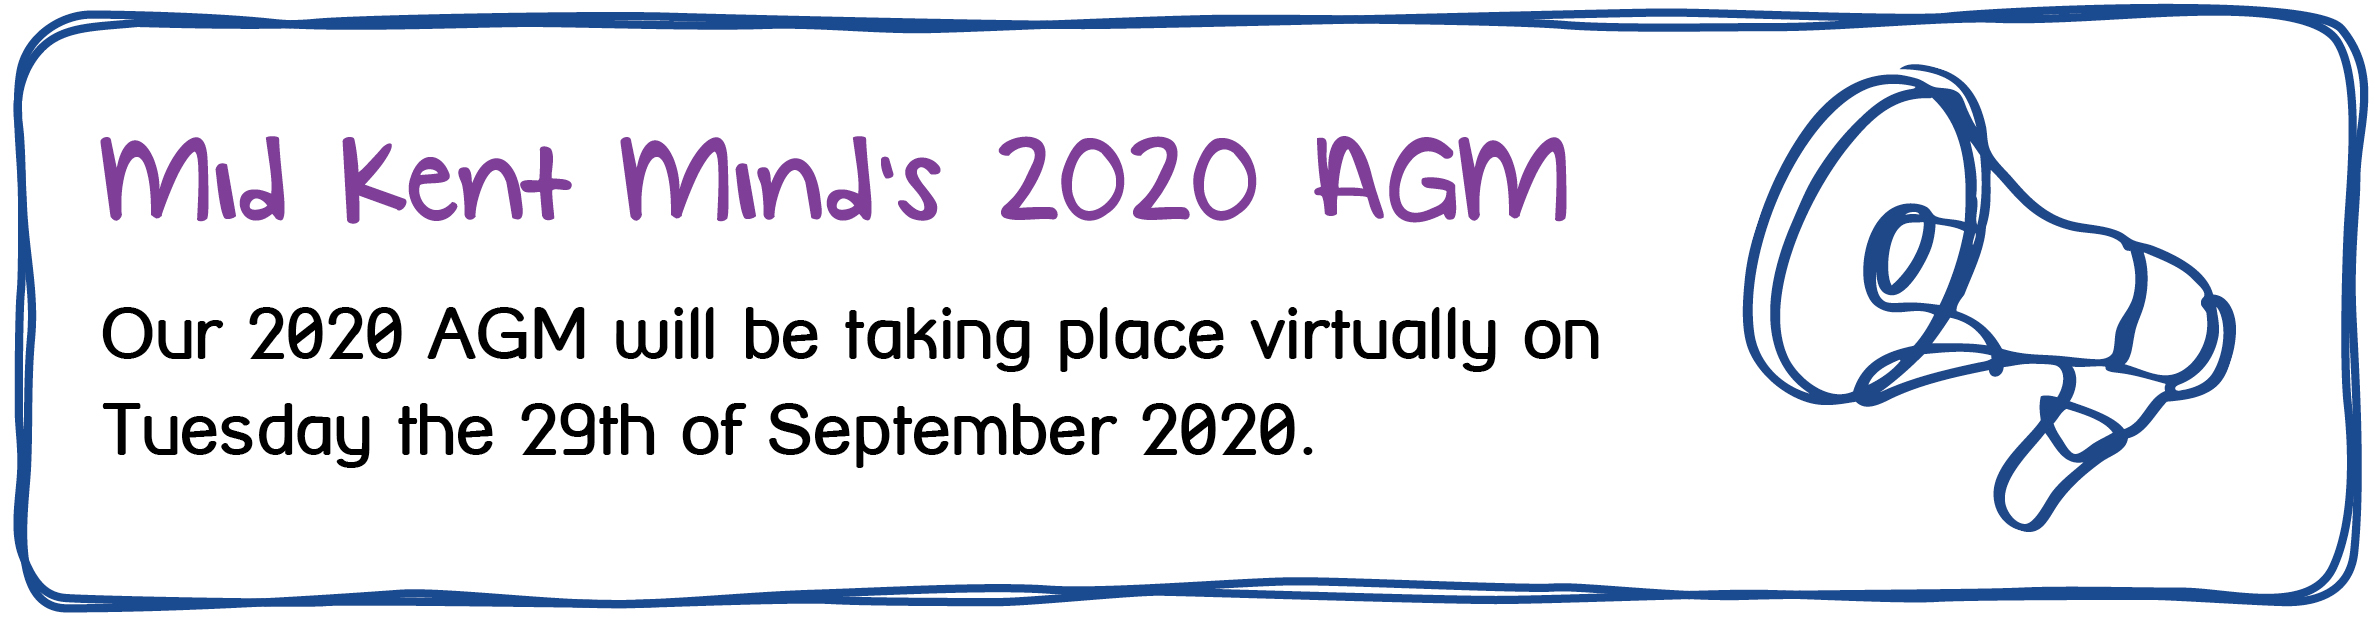 Mid Kent Mind's 2020 AGM. Our 2020 AGM will be taking place virtually on Tuesday the 29th of September 2020.